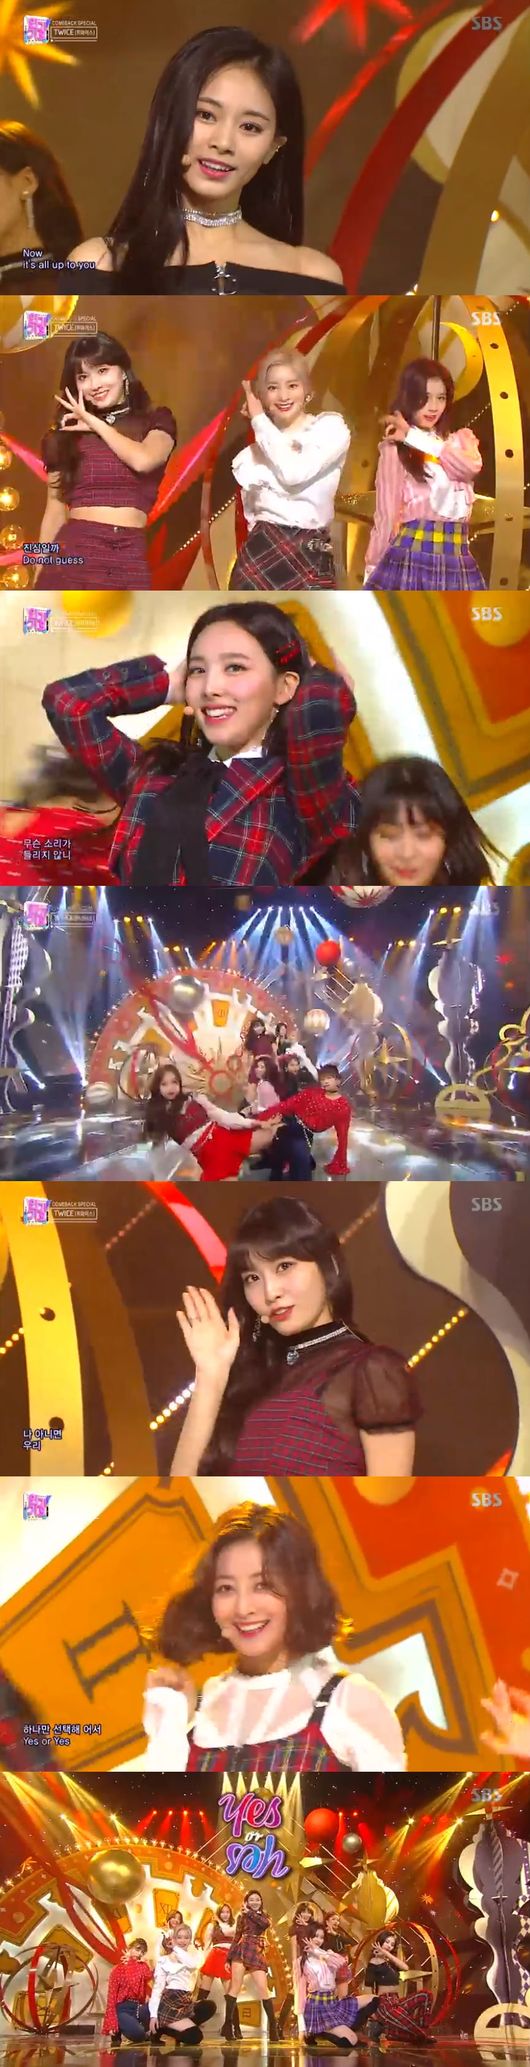 <p> {code:404,message:Maximum daily tra this Inkigayo # 1 accounted for.</p><p>11 days afternoon broadcast SBS InkigayoEXOs tempo, {code:404,message:Maximum daily tra to meet you, of La Vie EN rose # 1 candidate to climb in the fierce competition unfolded.</p><p>This day of broadcasting on 11 December in the last war at a glance, showing a comeback for the box is unfolded.</p><p>First EXO is a touching momentand tempo two stage. First comeback week a specially prepared touching moment on stage in sexy mood as the moment can not take my eyes was EXO tempocant stop driving beats and charisma as a music fans eyes and ears entertained.</p><p>TWICE the lovely myback. First BDZ Korean version with devilish charm. Love the minds of people down to the lyrics and Bouncing melodies are TWICE of the appeal to all a song. The title song Yes or yesin red as a check point to get the costumes as the stage.</p><p>K. mother callspecial stage decorated. Sweet K.s voice is still hard to properly shake. The title song then its back toin the sense in which sad emotional as the one of the music video seemed to see what they created.</p><p>Excitement filled debut with. fans of cheers elicited. SHINees key and his own feature for solo debut song Forever Yours stage. Last youth for as refreshing melodies and keys and owned the closest Kemi is a feel-good Tingle.</p><p>Beautiful garden is the La Vie EN rose # 1 candidate on the right, Inkigayodebut the first week of Music Broadcast stage successfully finished. This day white and black outfits on stage with the right business support is a natural stage presence and must be stiff fit performance as the best debut.</p><p>Multiplication is a special stage a comeback. Be Myselfto a stylish in a fantastic stage look. The title song Not That Typeyou attractive to. The red points given by the more intense impression of him, and of all ages to capture the powerful performances and addictive song is the eyes and ears both caught.</p><p>Chae Yeon is a whopping 3 years and 6 months on the comeback. New song seen youstill dance skills. Addictive chorus points on over dance with this dancing Queen return of the informed.</p><p>The only Monsta X domestic Music Broadcast 4 golds swept Shoot Outwith a charismatic stage and its popularity was, straight to business I am YOUput your but energetic newcomer to showed.</p><p>On April, wiki images, Golden train, the, seven English Clark, ATEEZ, dream, night the variety stage, Inkigayo viewers captivated the minds of. / [Photos] Inkigayo broadcast screen capture.</p><p> Inkigayo broadcast screen capture.</p>